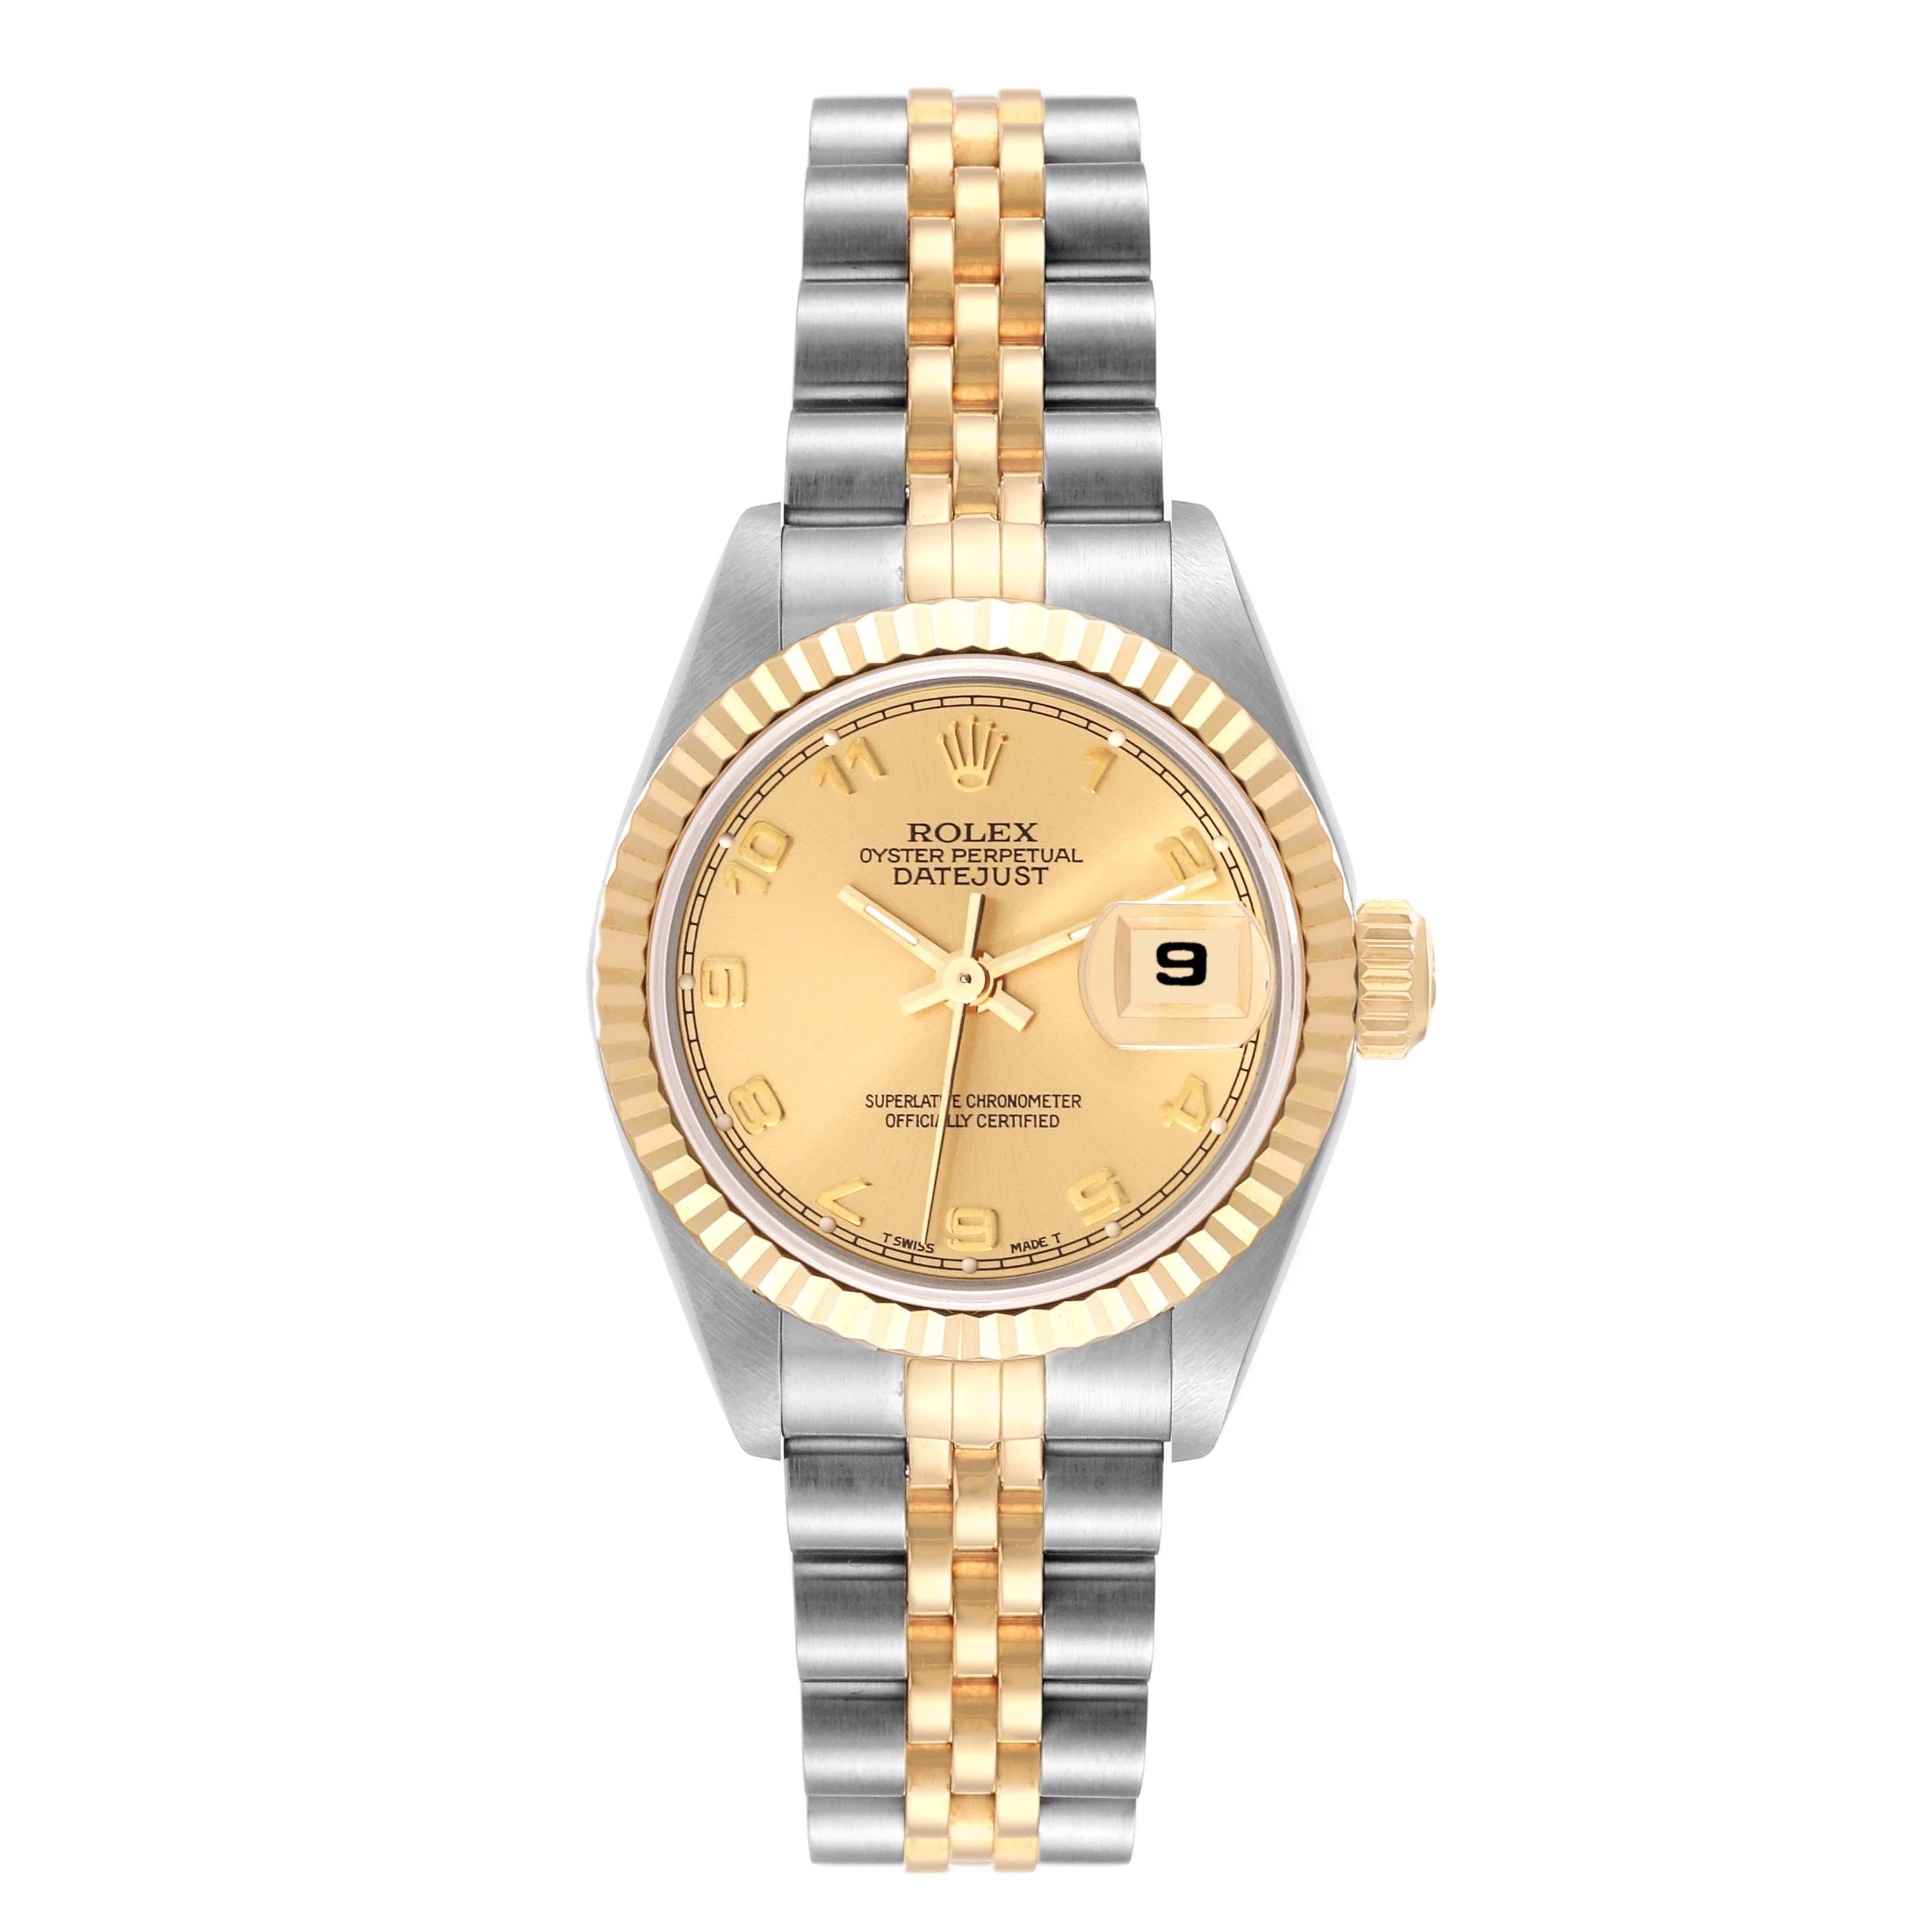 Rolex Datejust Steel Yellow Gold Champagne Arabic Dial Ladies Watch 69173. Officially certified chronometer automatic self-winding movement. Stainless steel oyster case 26.0 mm in diameter. Rolex logo on the crown. 18k yellow gold fluted bezel.